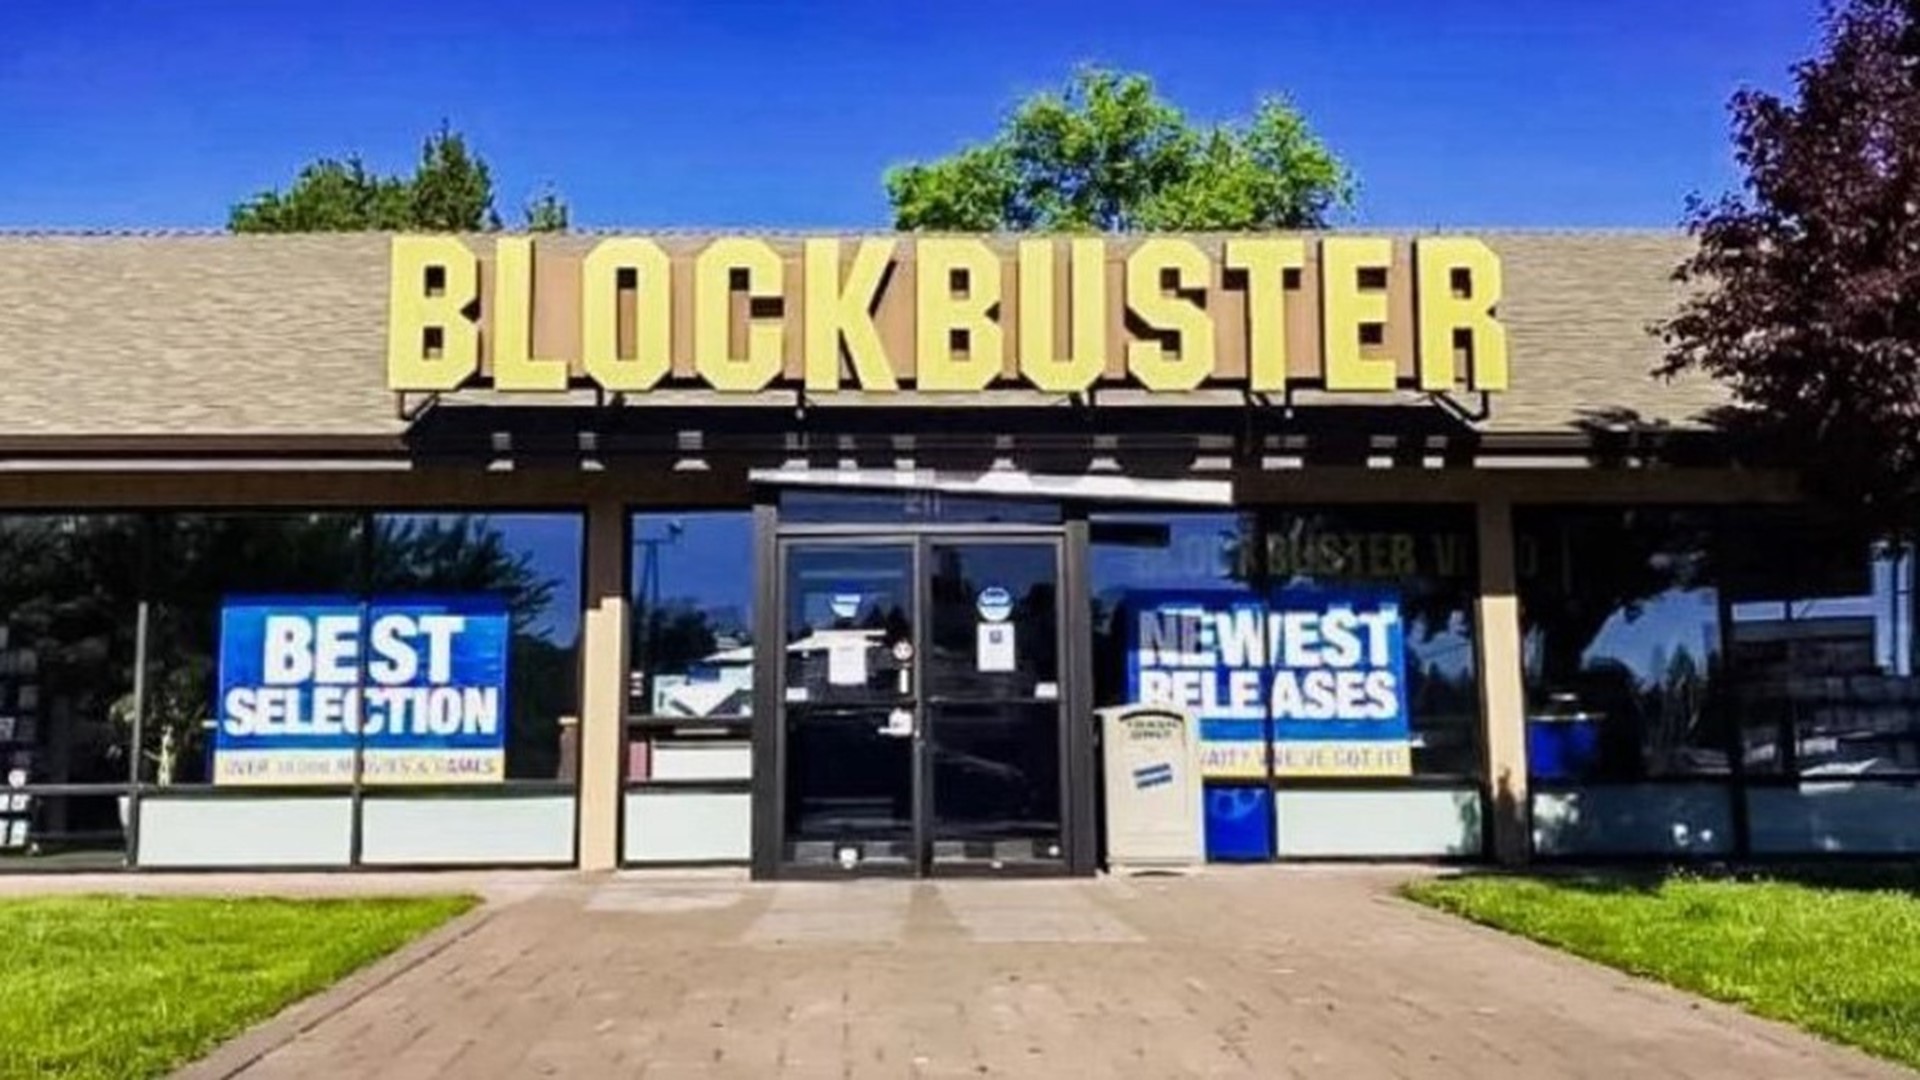 Blockbuster probably regrets not buying Netflix when it had the chance. #k5evening